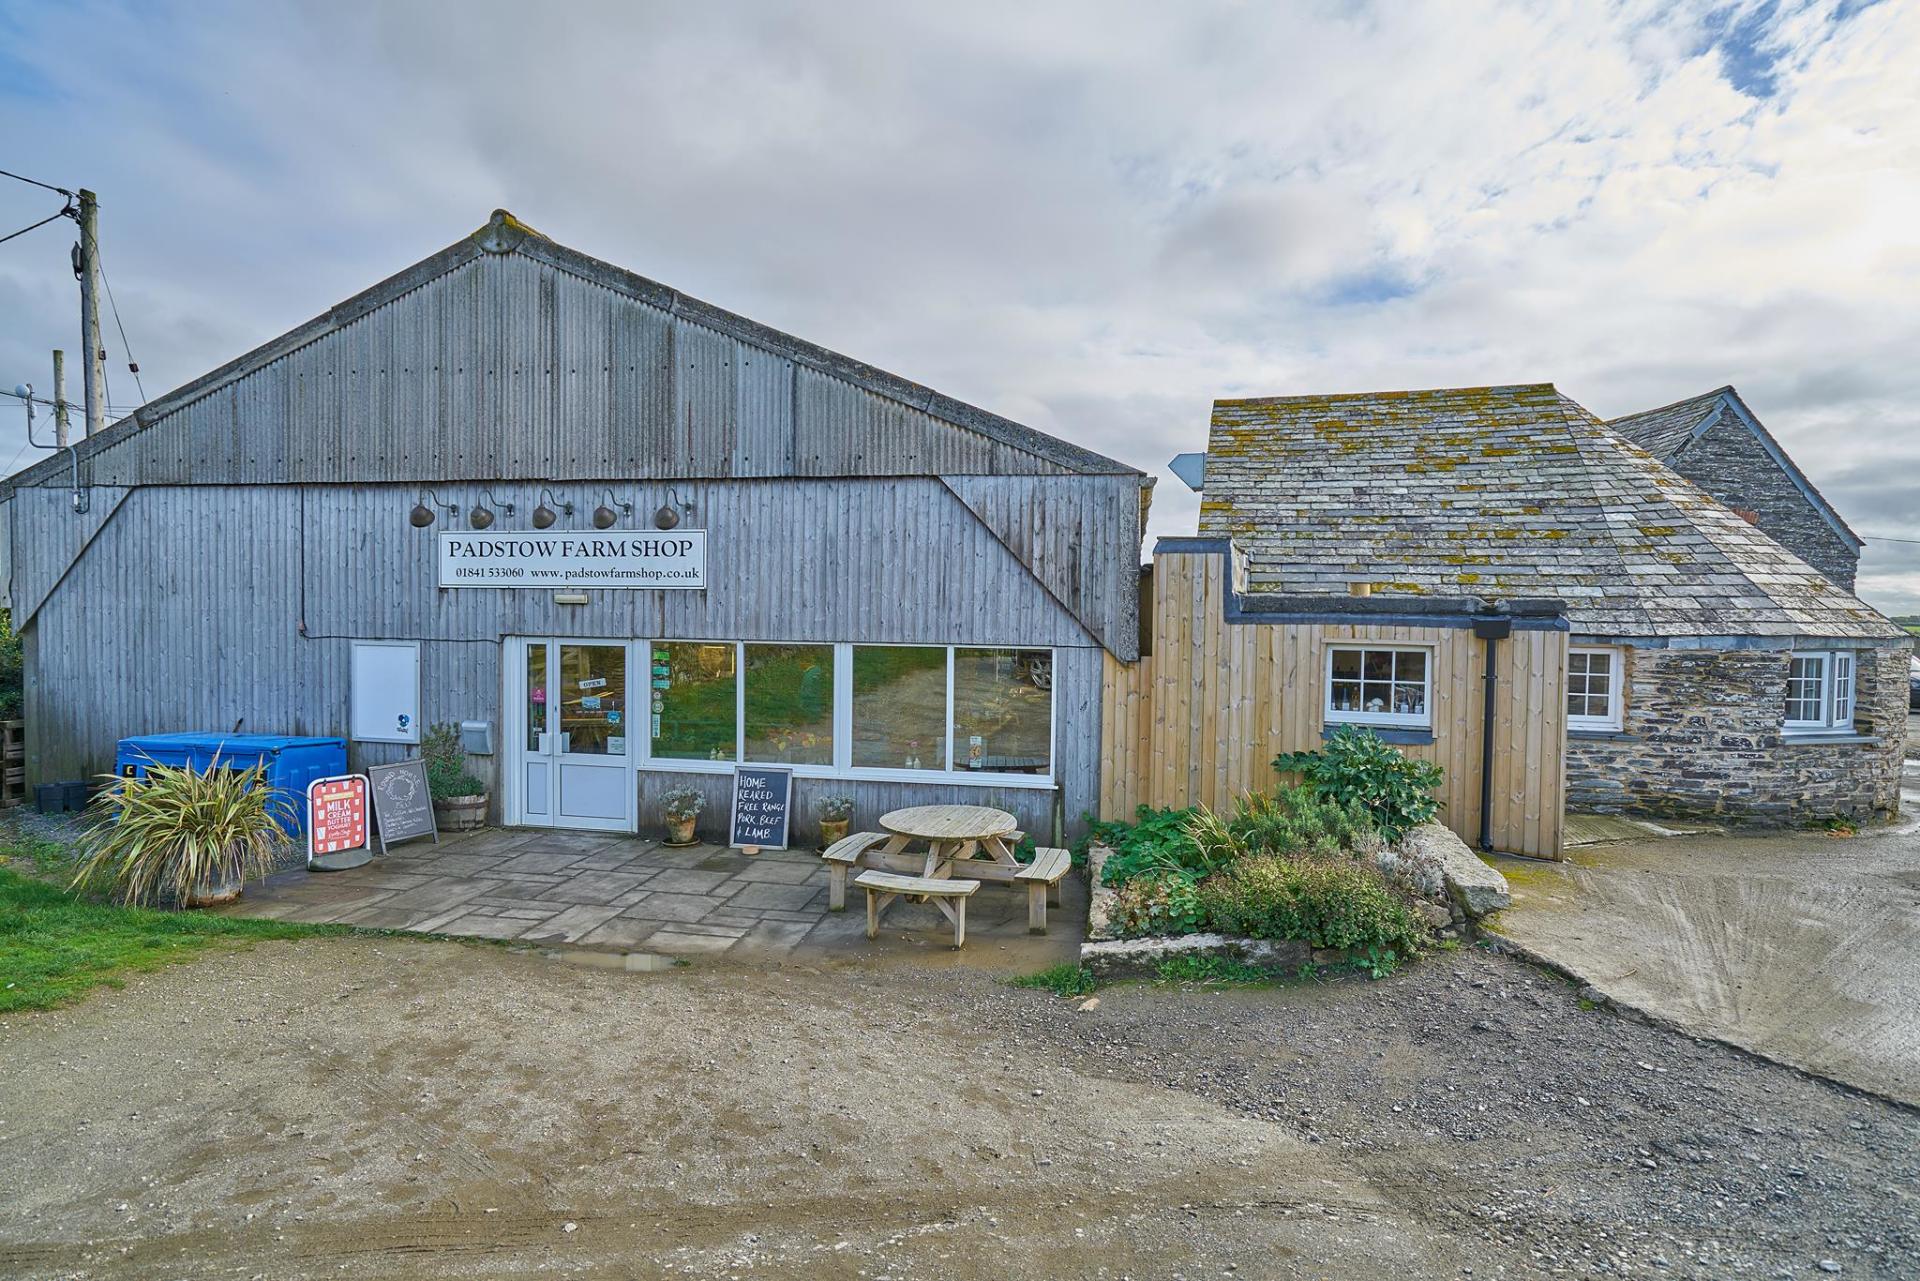 Padstow Farm Shop and Roundhouse Deli